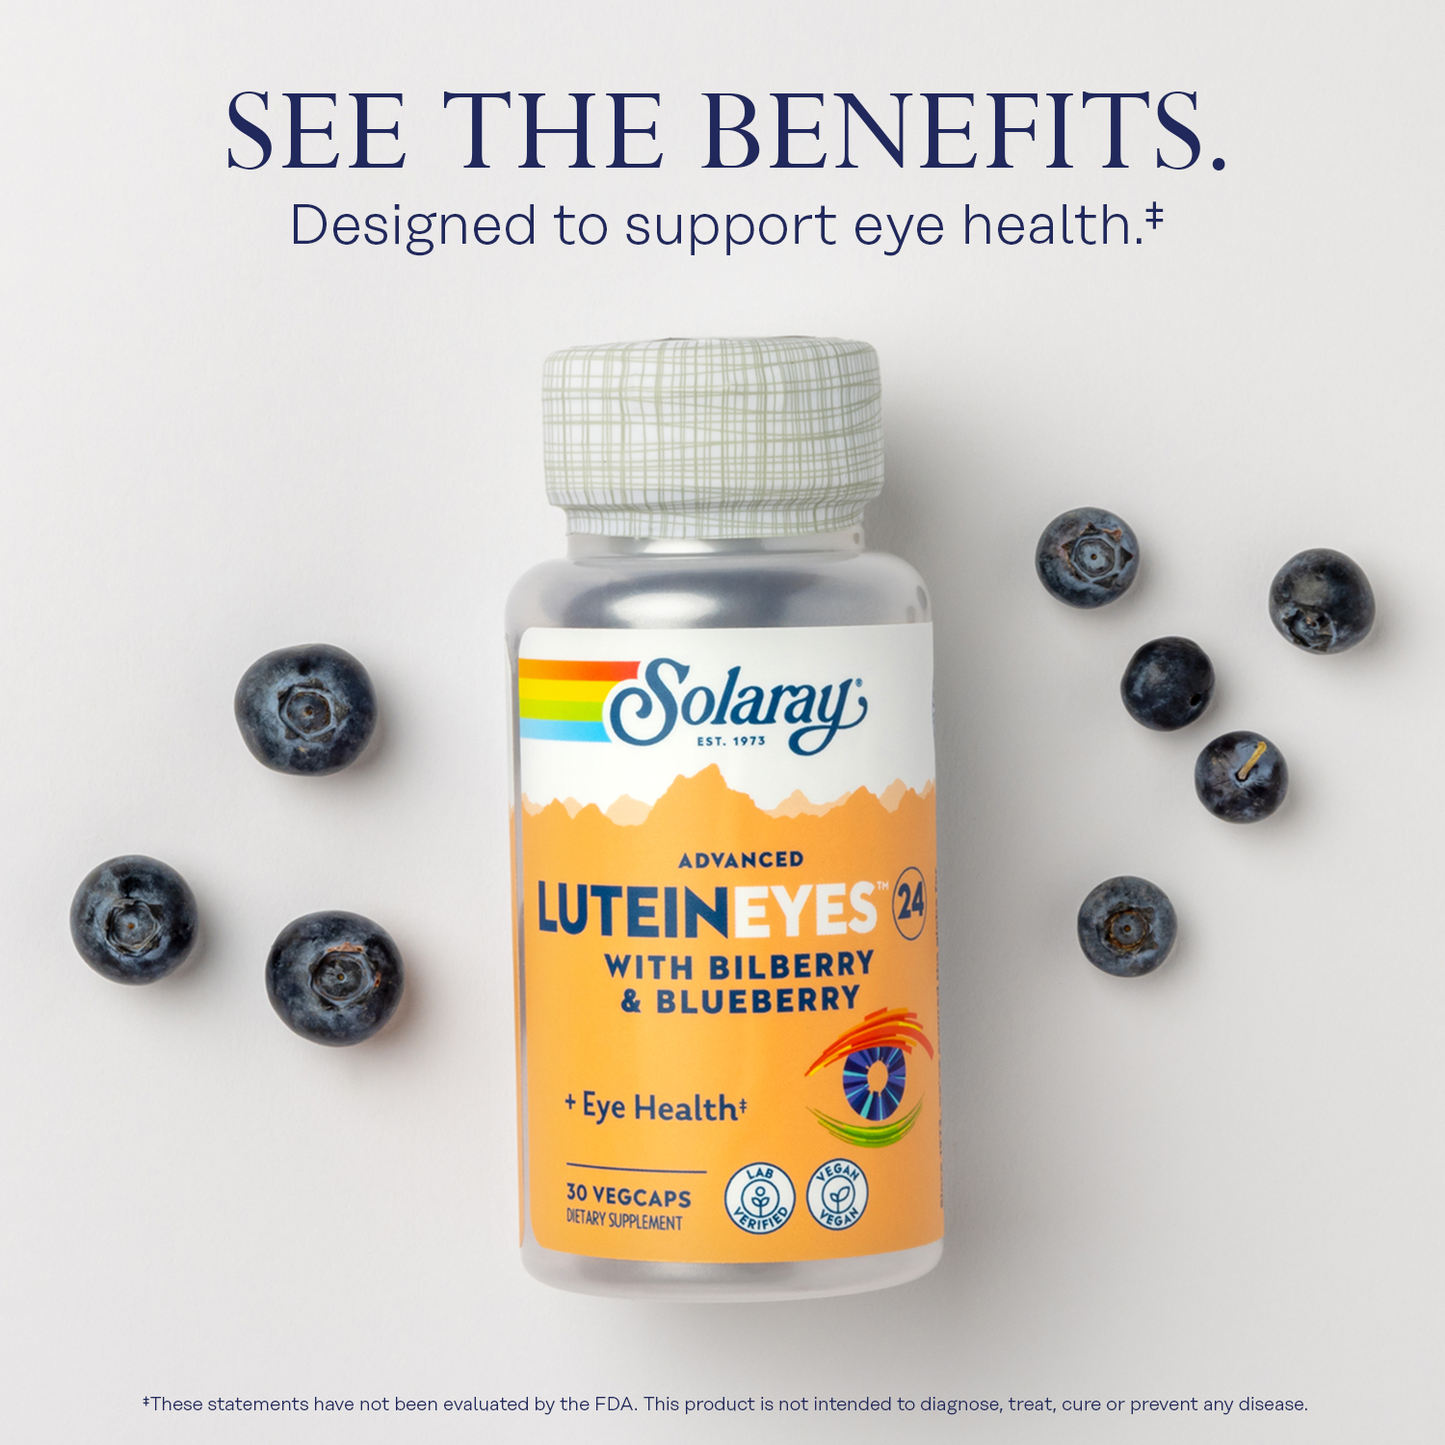 Solaray Advanced Lutein Eyes, 24mg Eye & Macular Health Support Supplement w/ Naturally Occurring Lutein , 60 CT (30 Servings, 30 VegCaps)